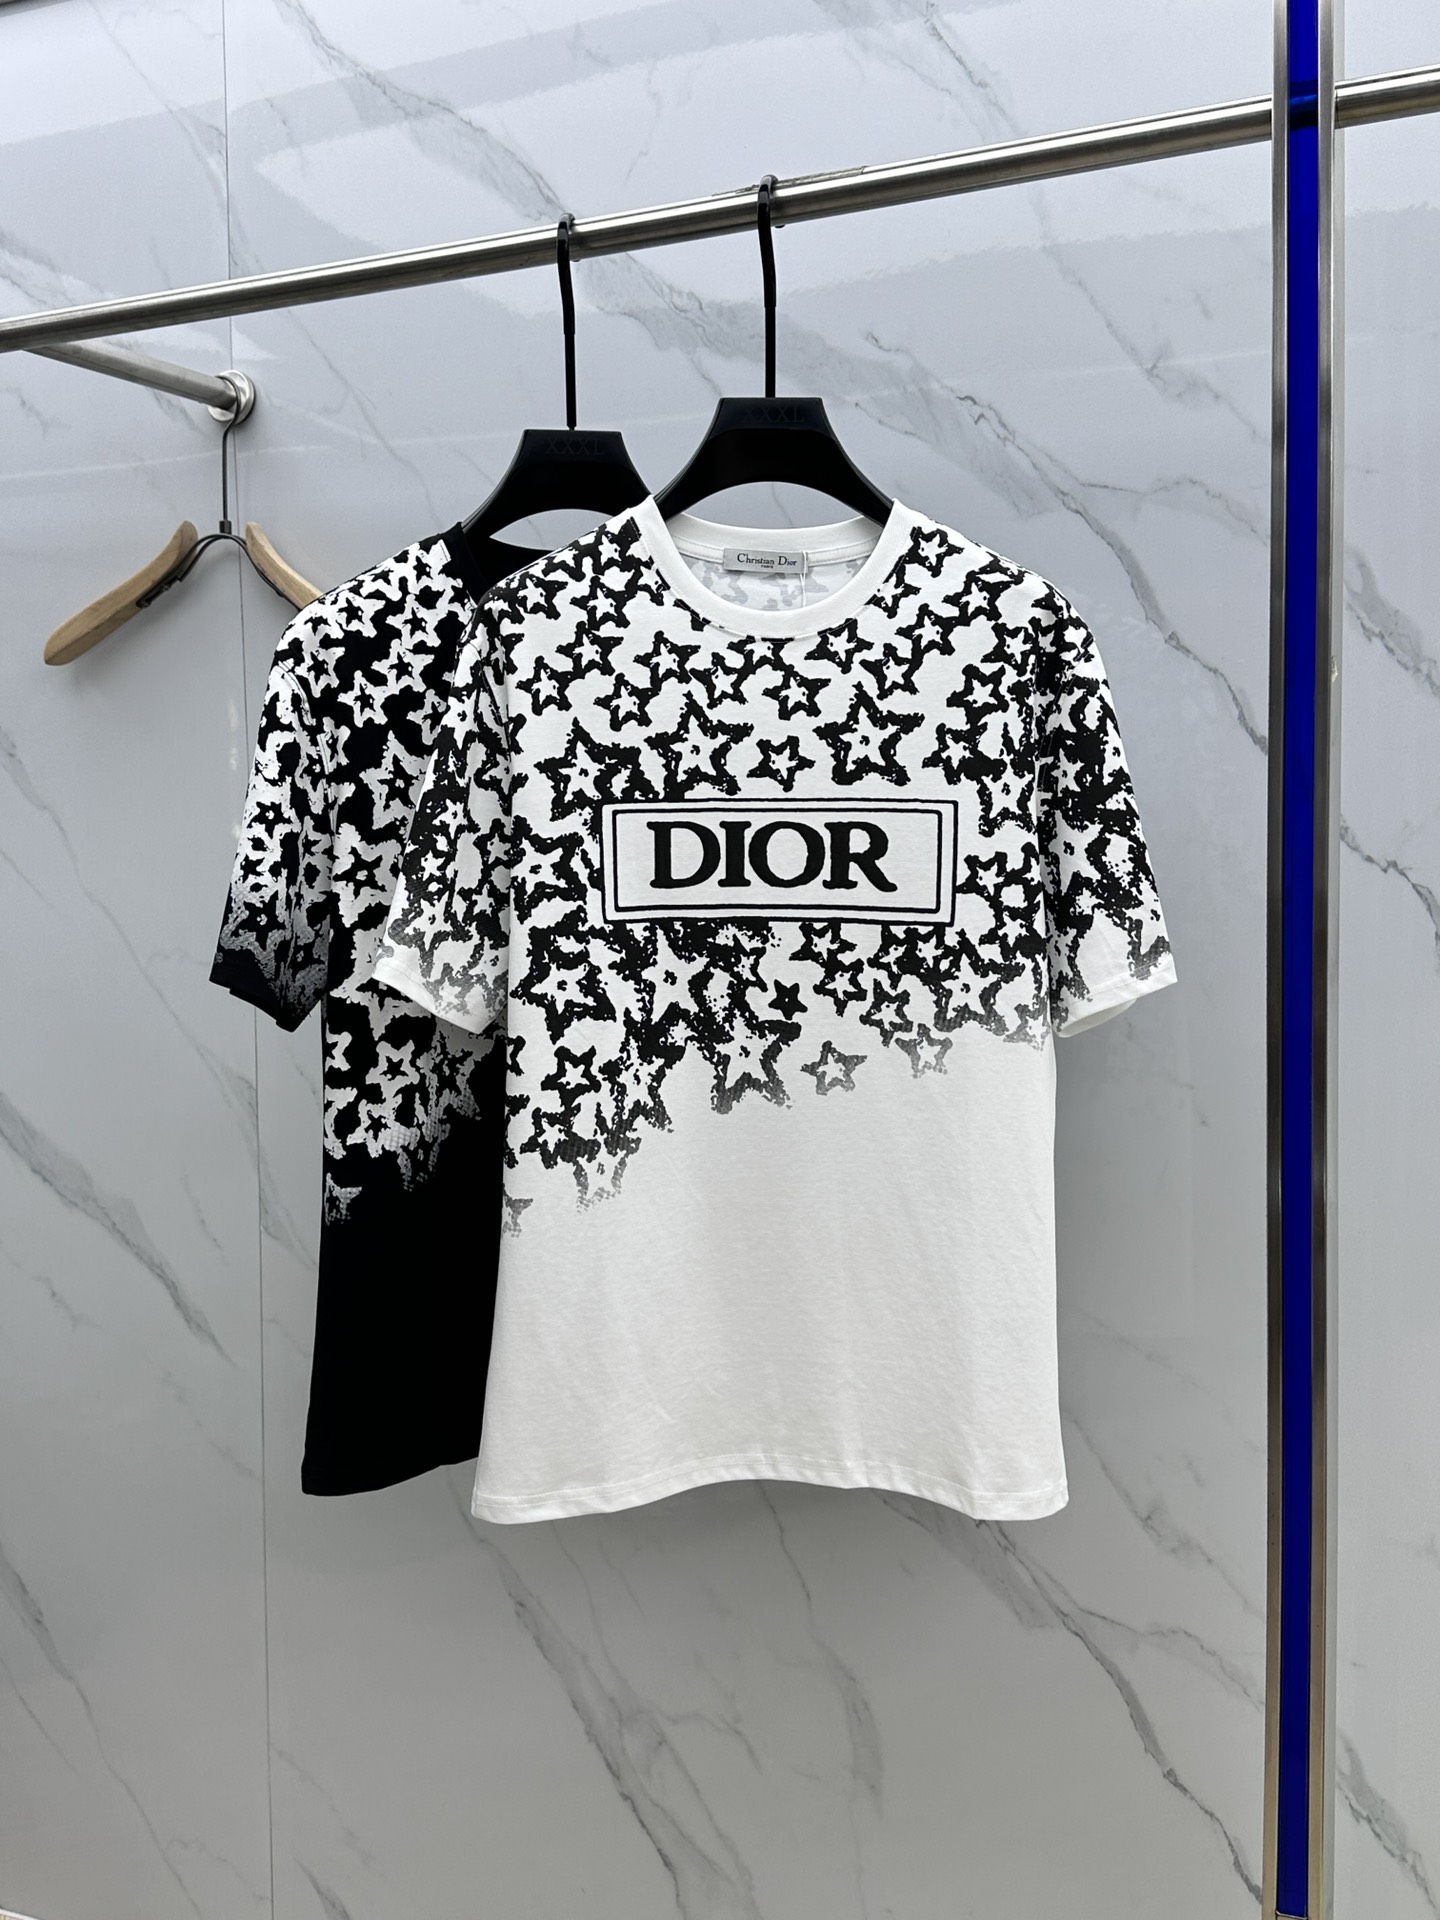 Dior Clothing T-Shirt Embroidery Cotton Mercerized Summer Collection